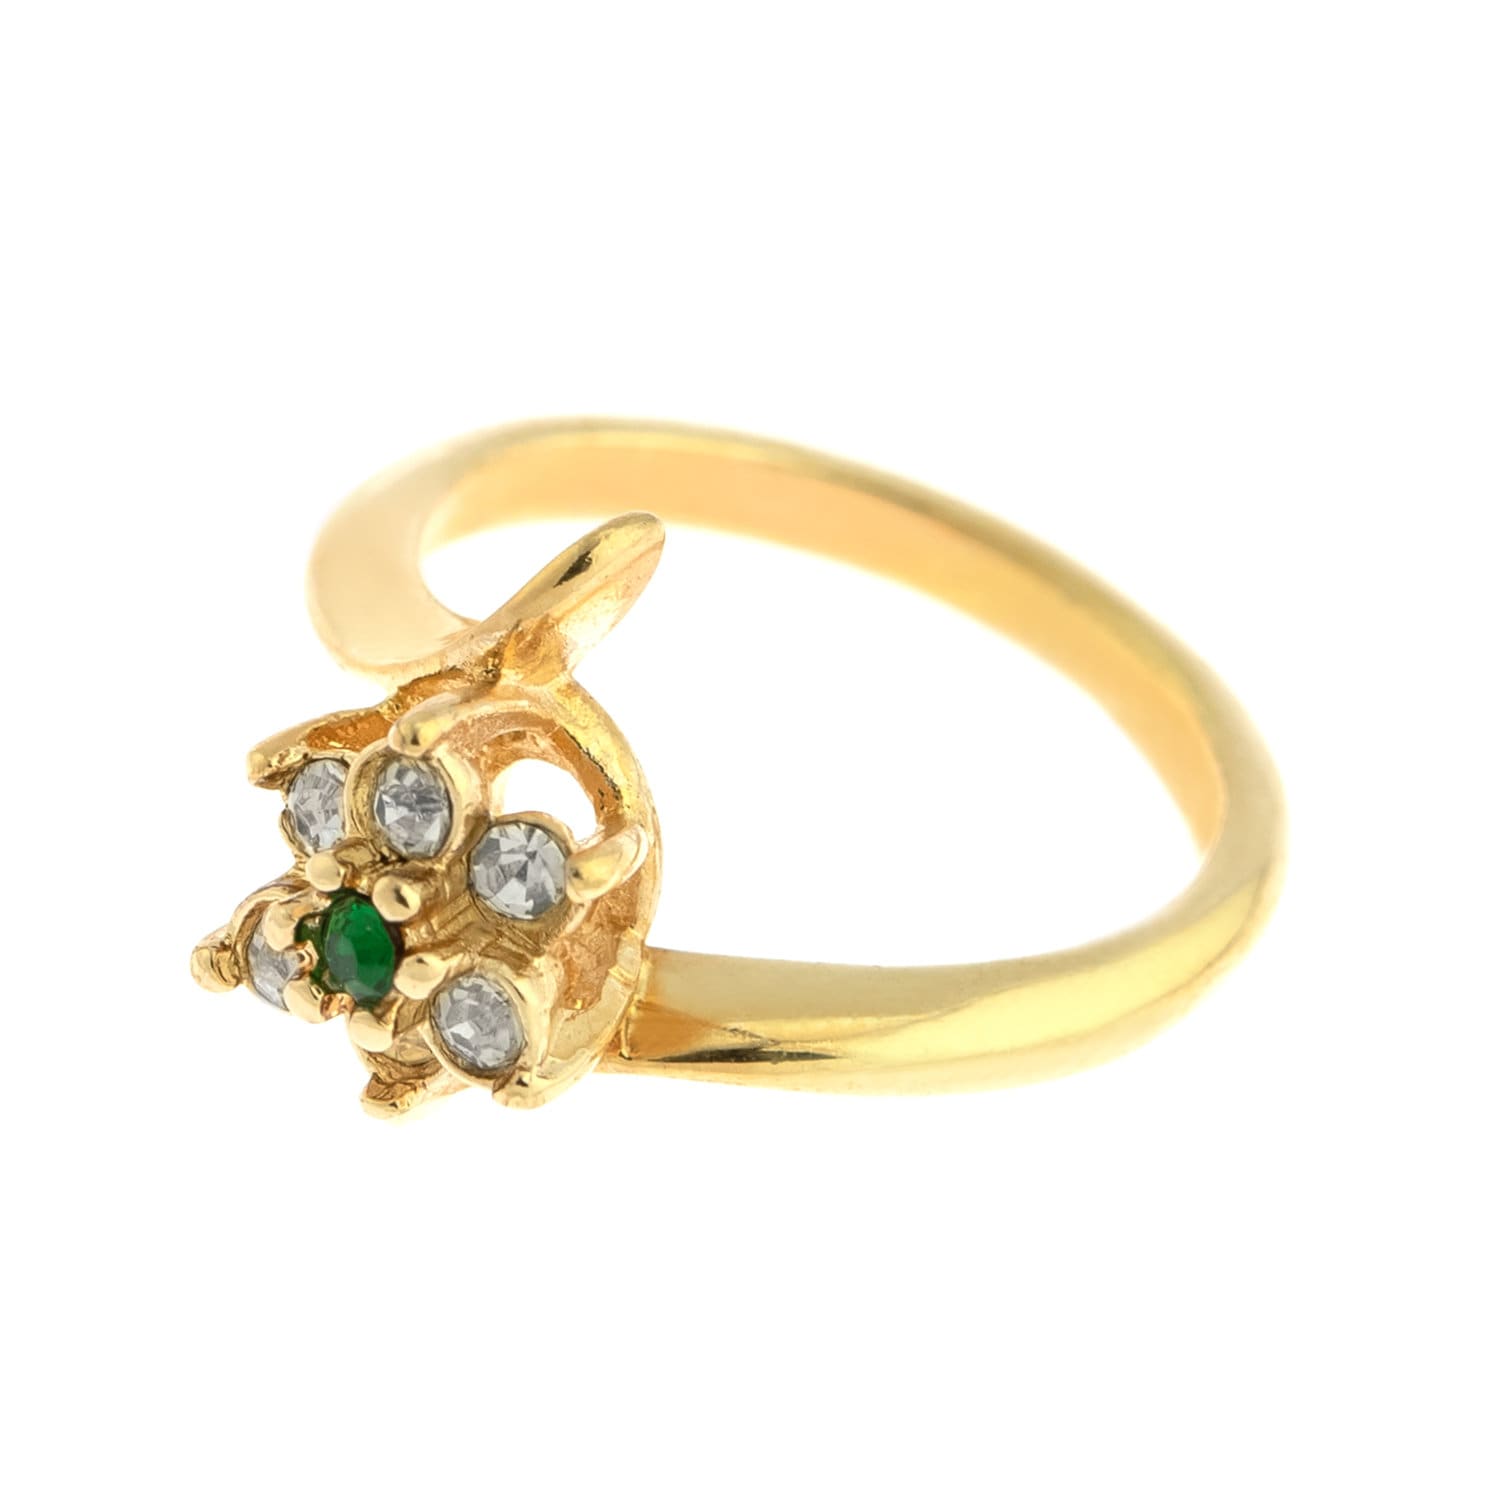 Vintage Ring 1970's Emerald and Swarovski Crystal Ring 18kt Gold Ring R842 - Limited Stock - Never Worn